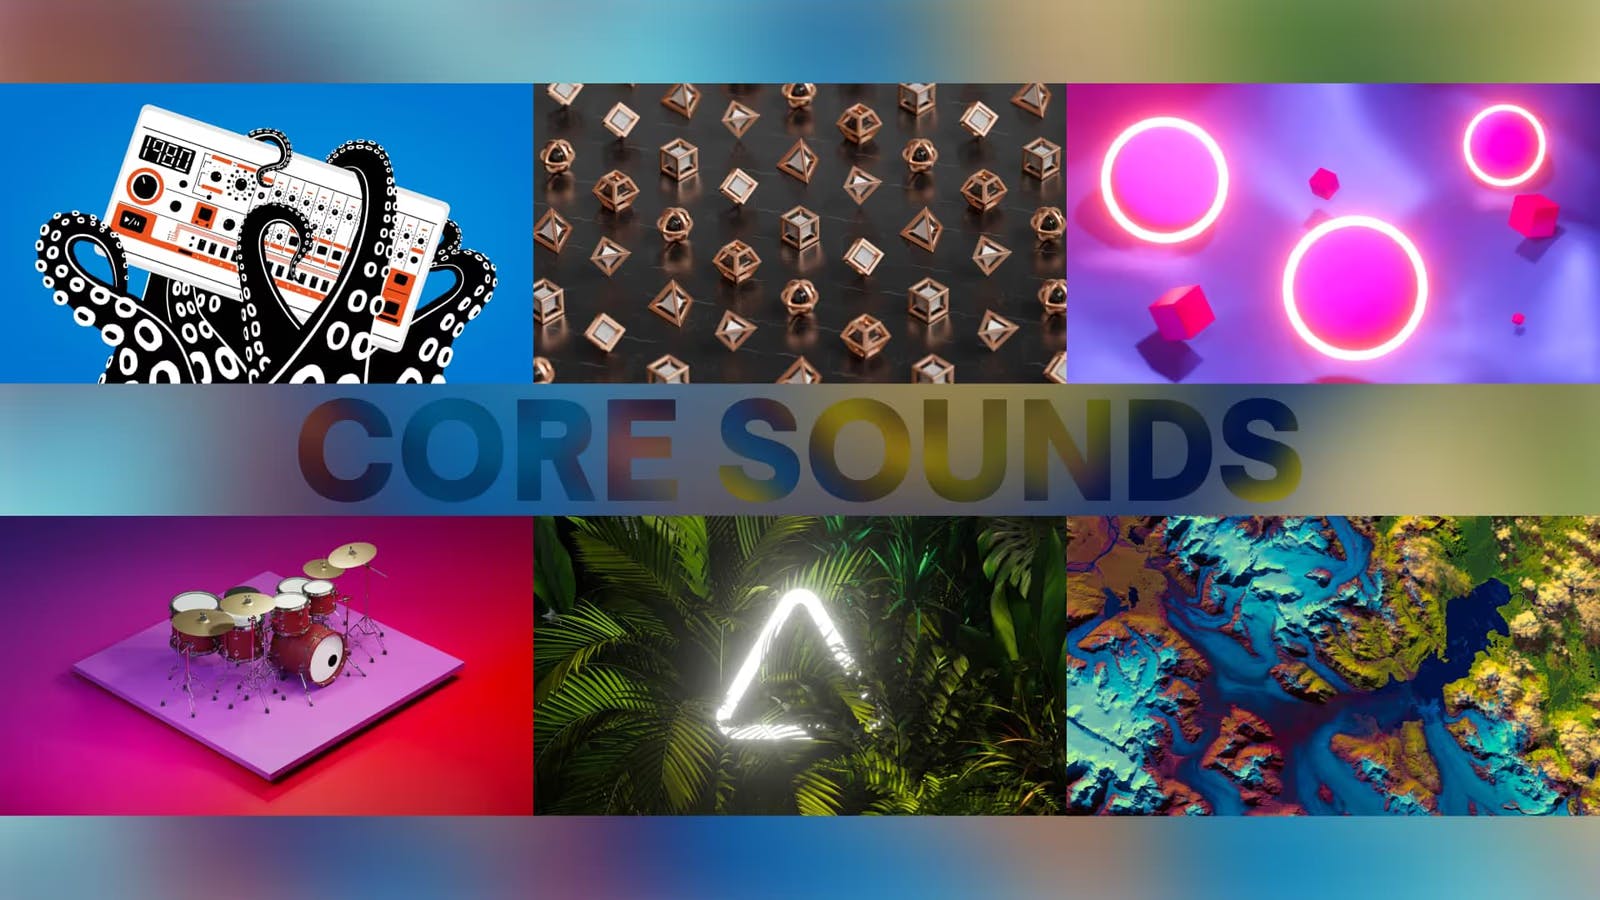 An image showing the cover art for the 6 packs included in the Core Sounds Library